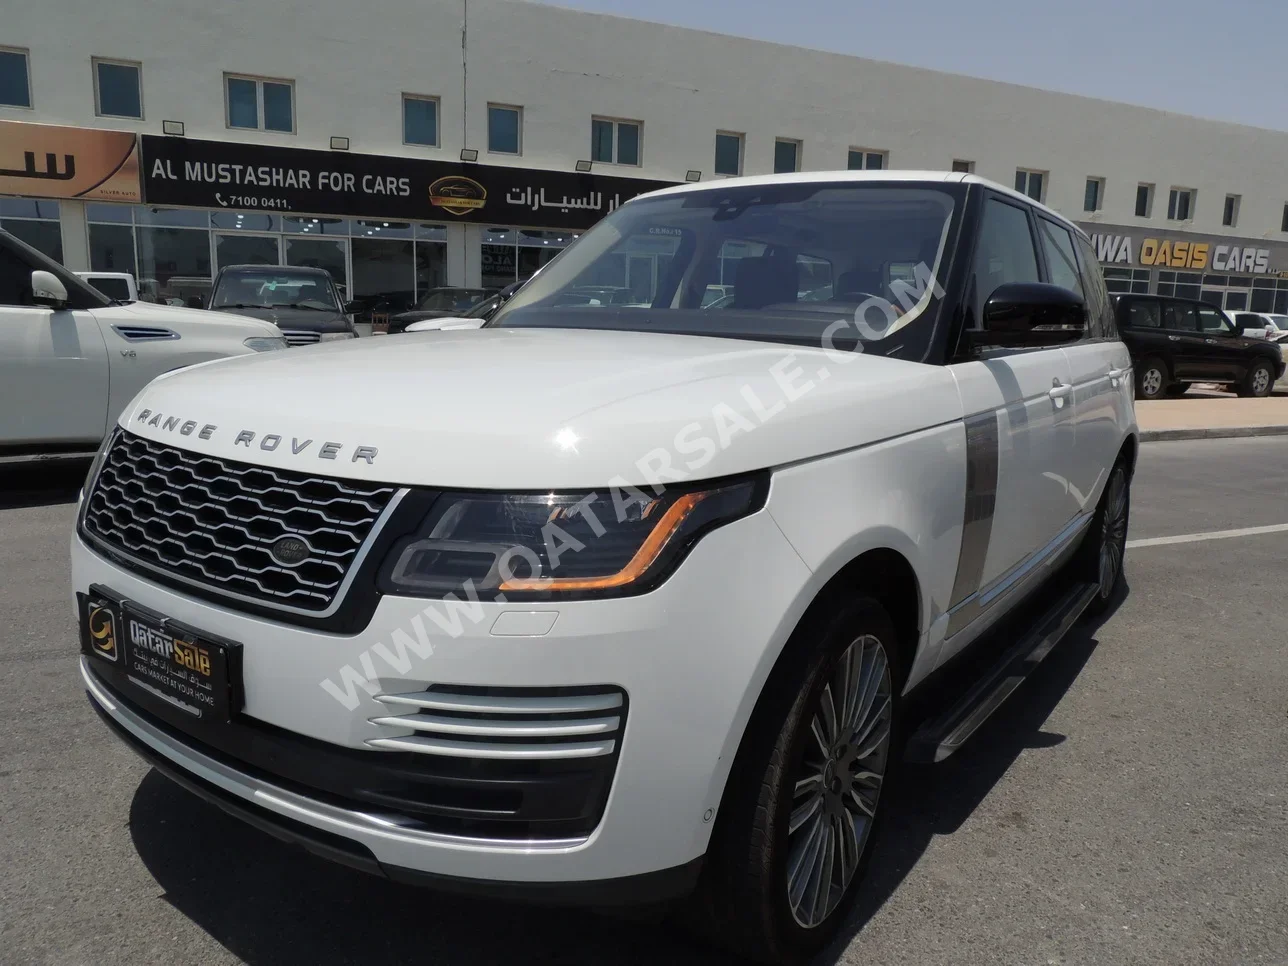 Land Rover  Range Rover  Vogue HSE  2018  Automatic  116,000 Km  6 Cylinder  Four Wheel Drive (4WD)  SUV  White